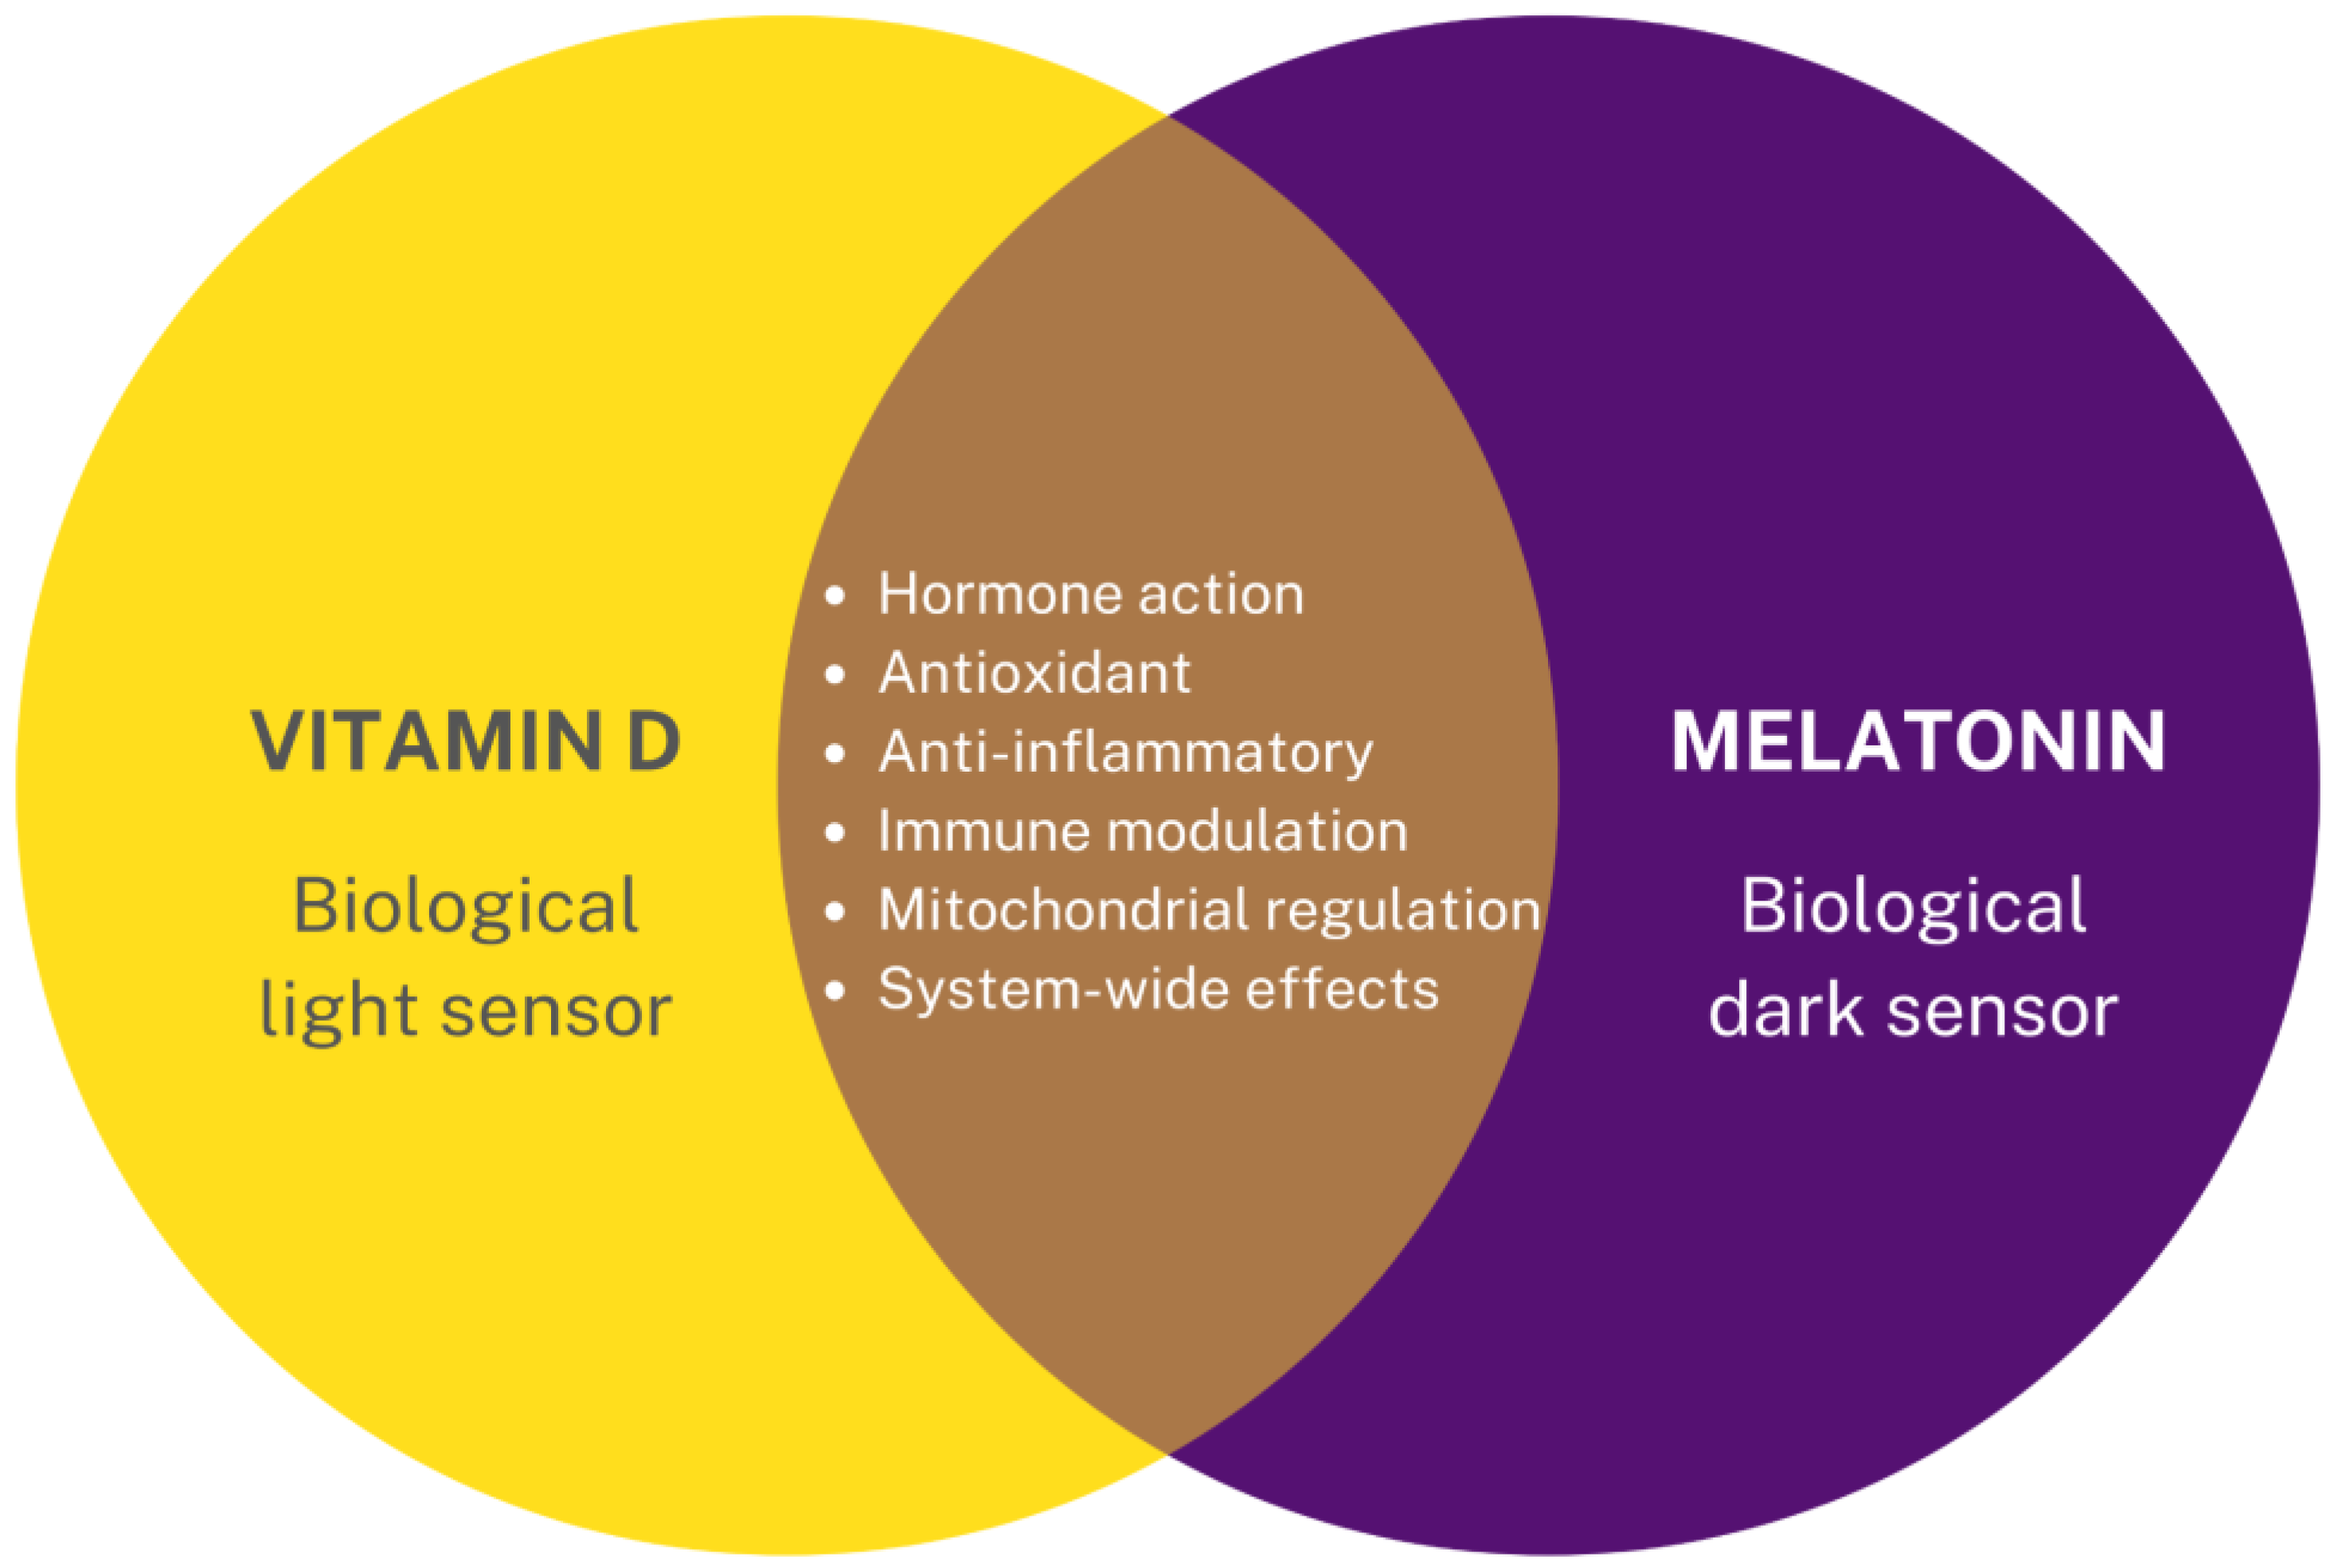 Nutrients | Free Full-Text | Is Melatonin the &ldquo;Next Vitamin  D&rdquo;?: A Review of Emerging Science, Clinical Uses, Safety, and Dietary  Supplements